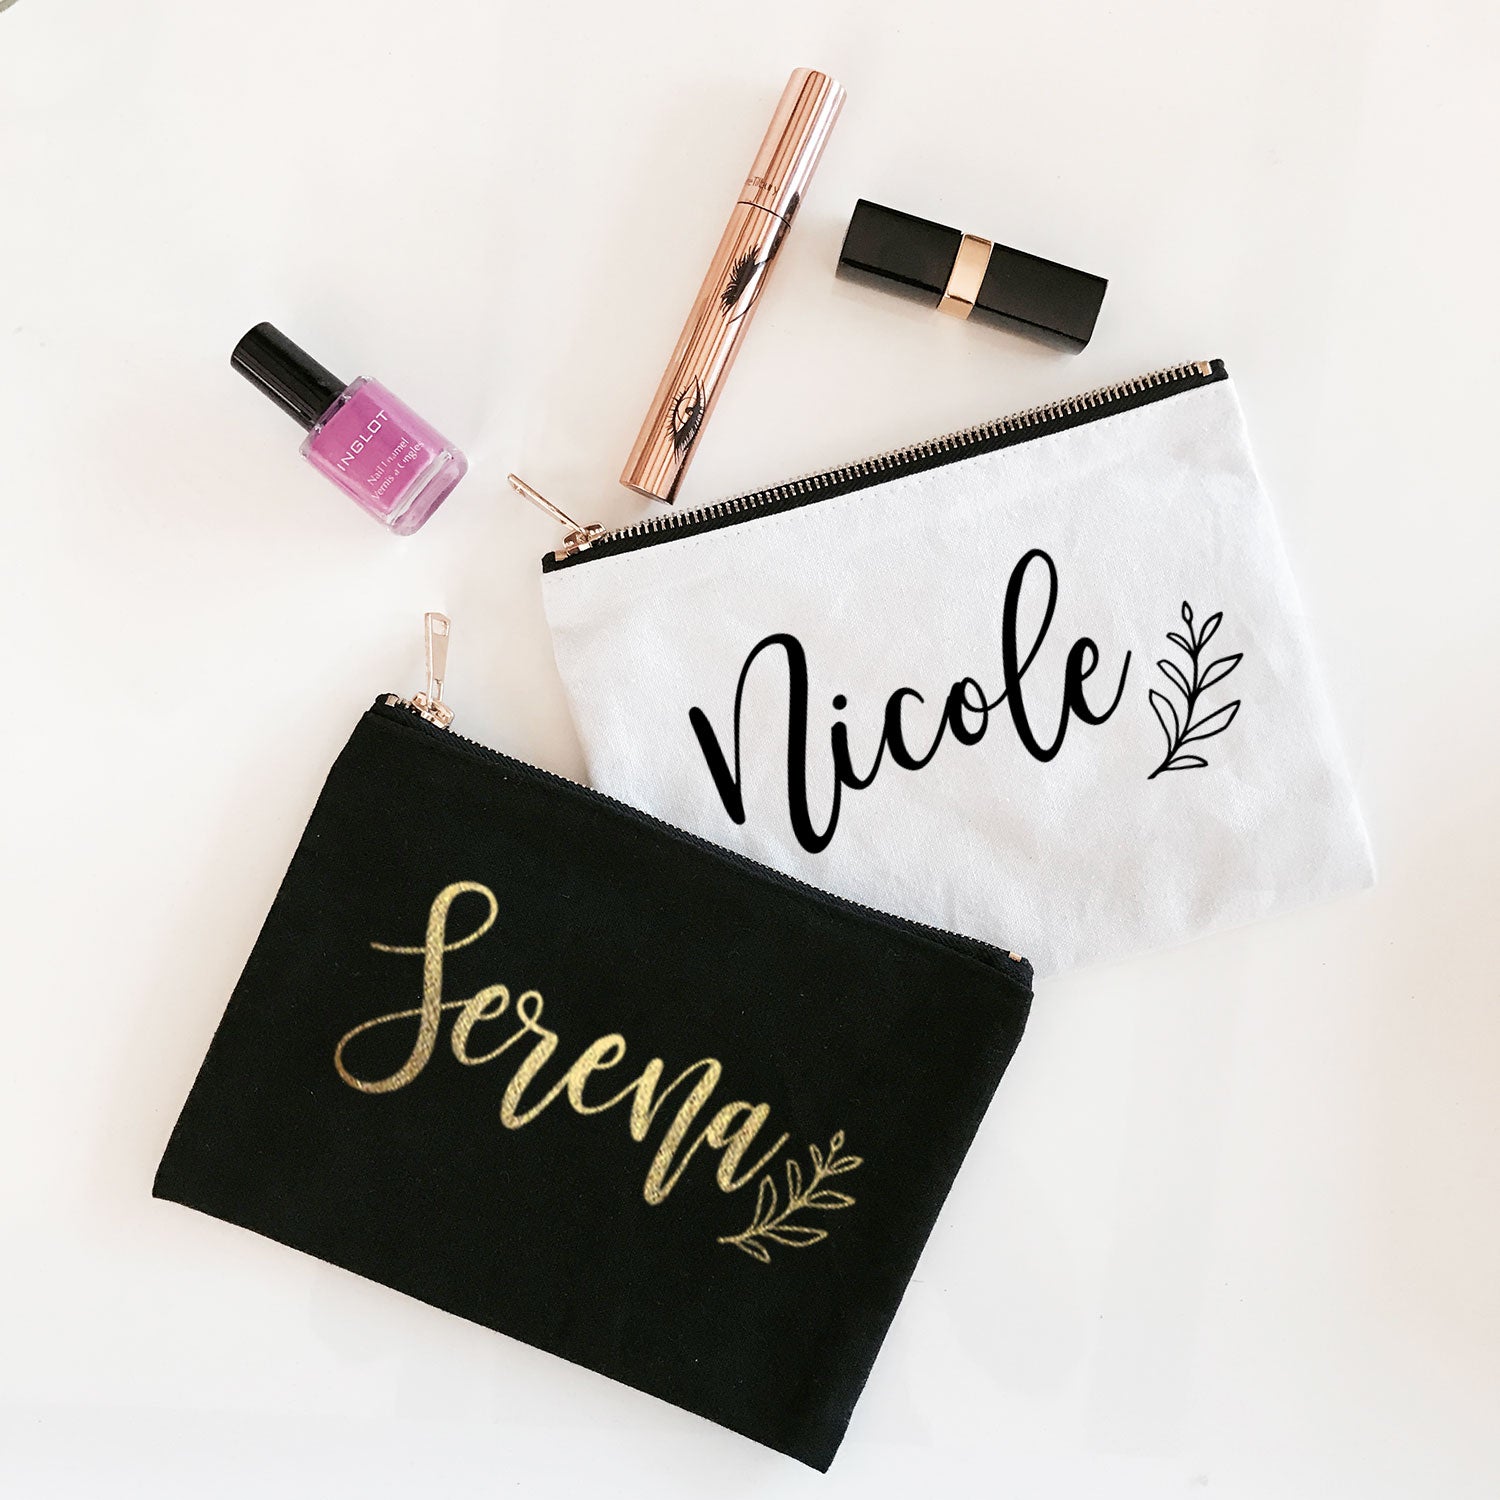 Monogrammed Canvas Cosmetic Bag